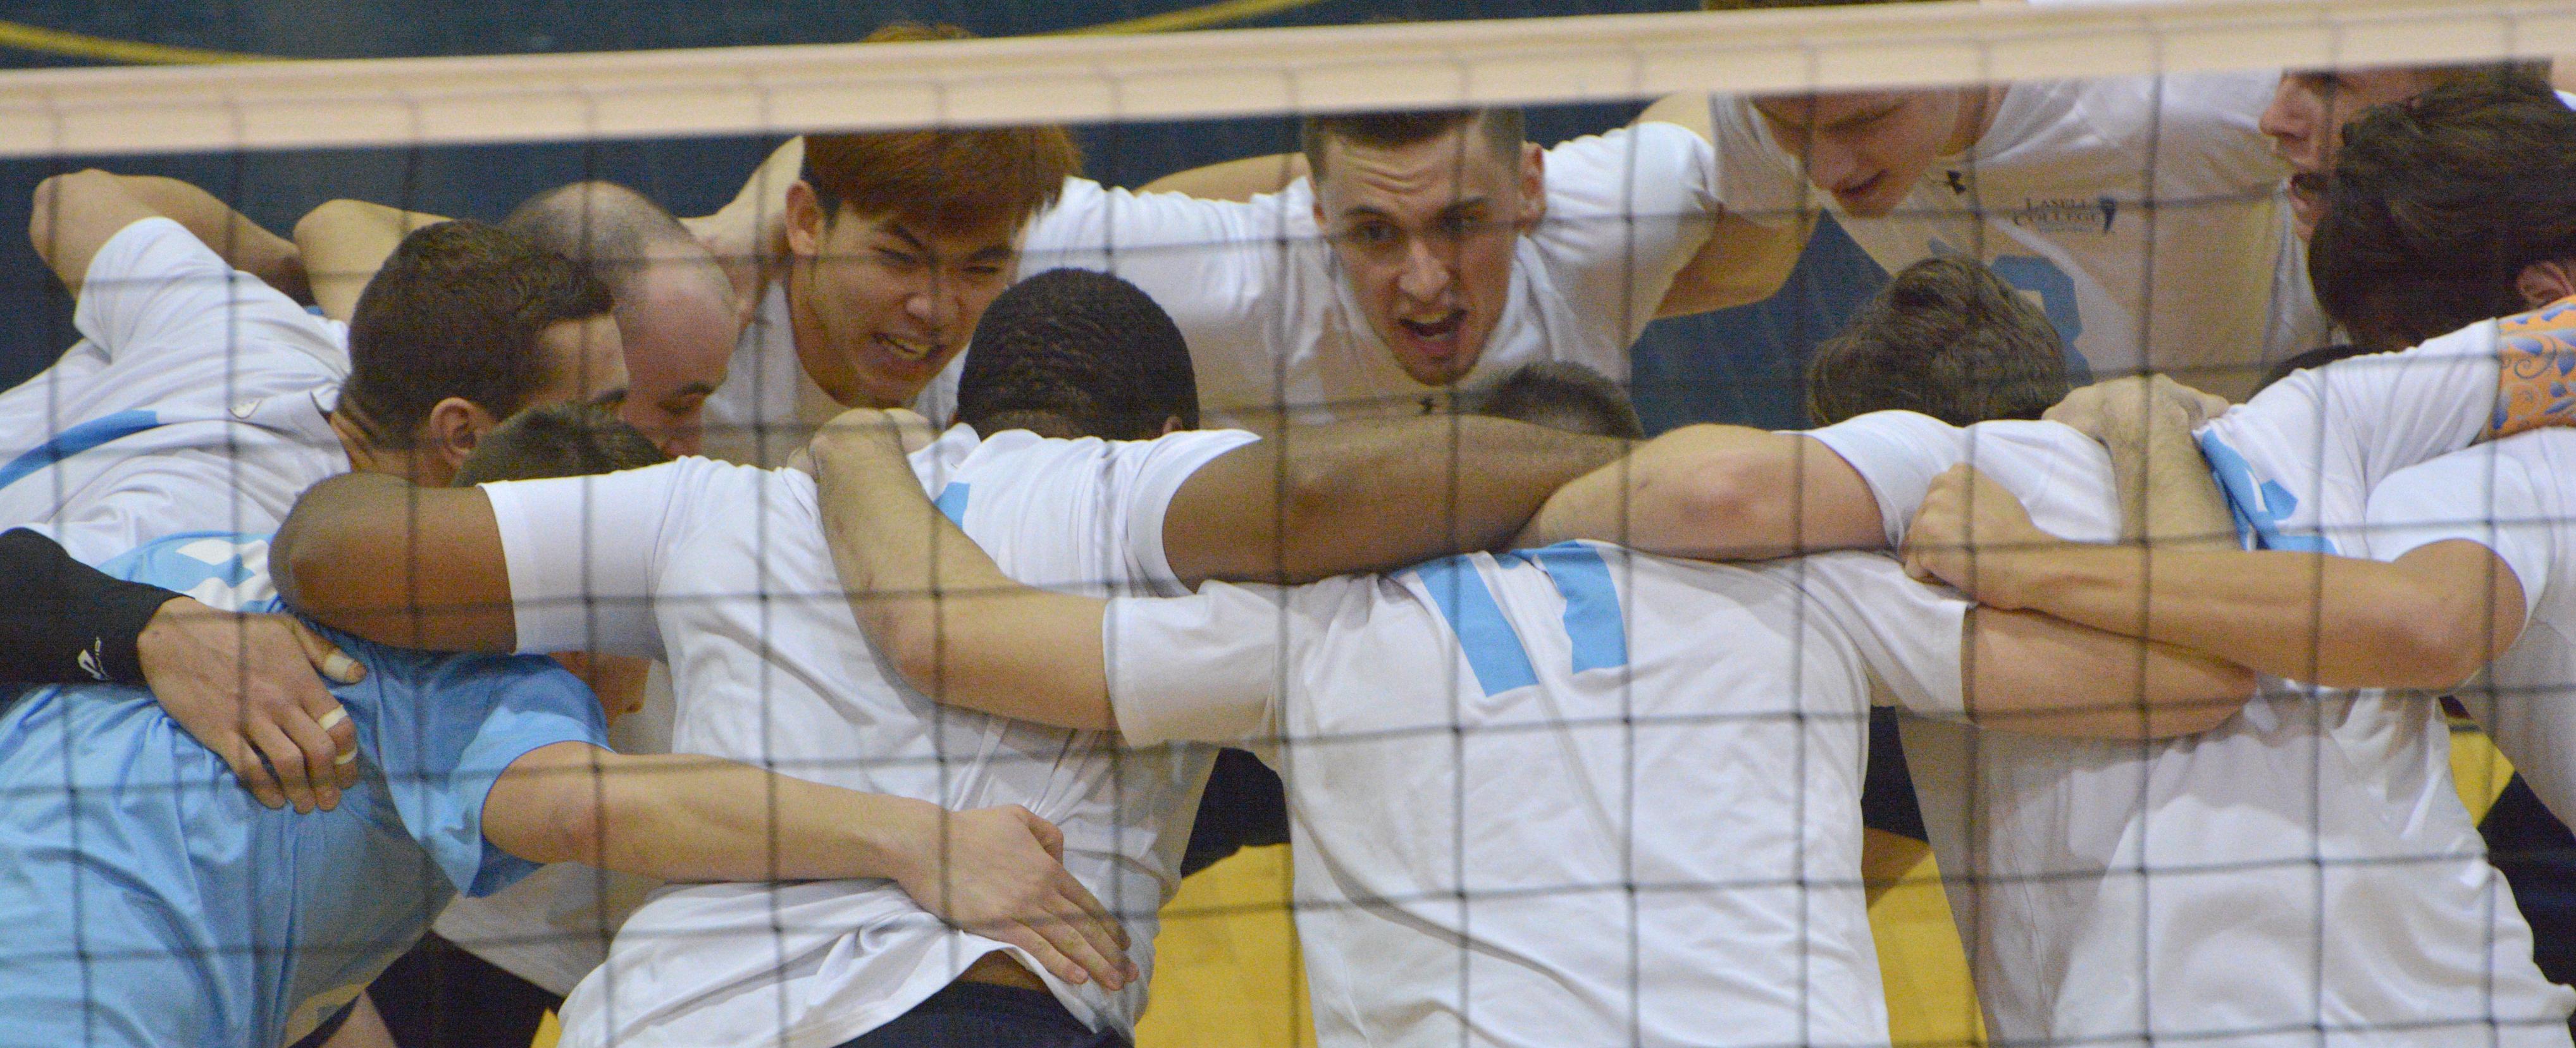 Men's Volleyball Takes on Top Level Competition at Juniata Invitational